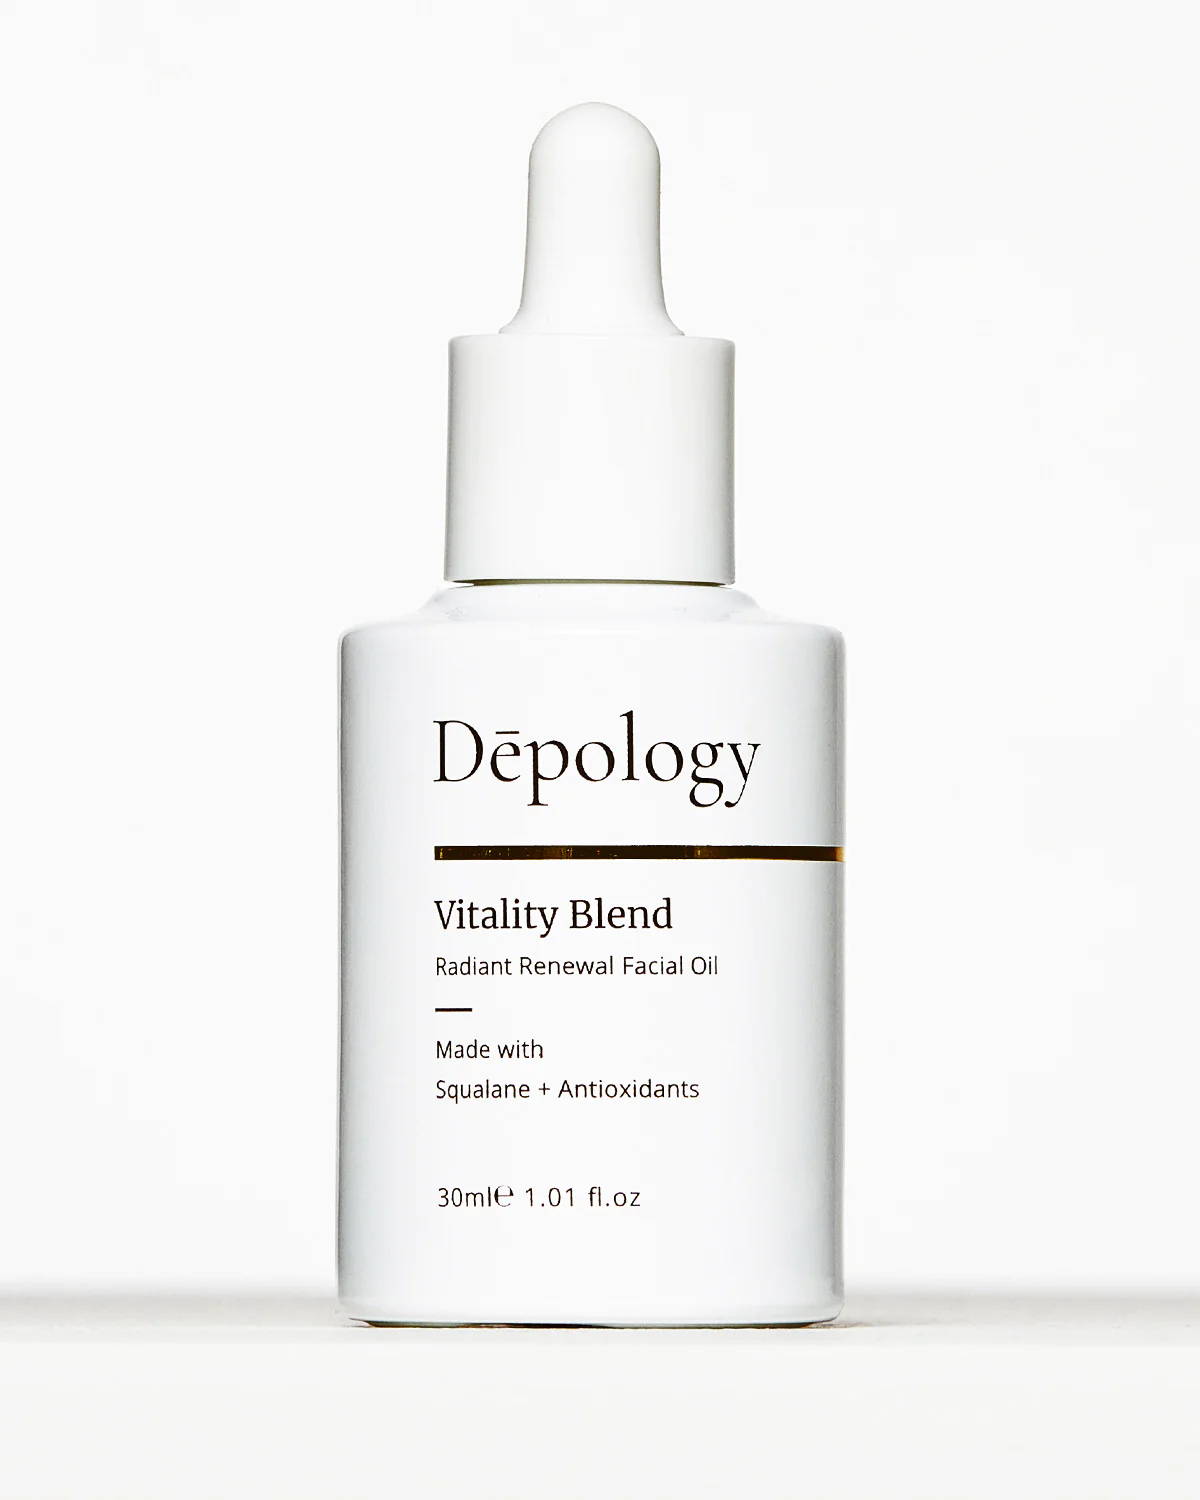 Depology products with resveratrol in skincare. In facial oil white bottle